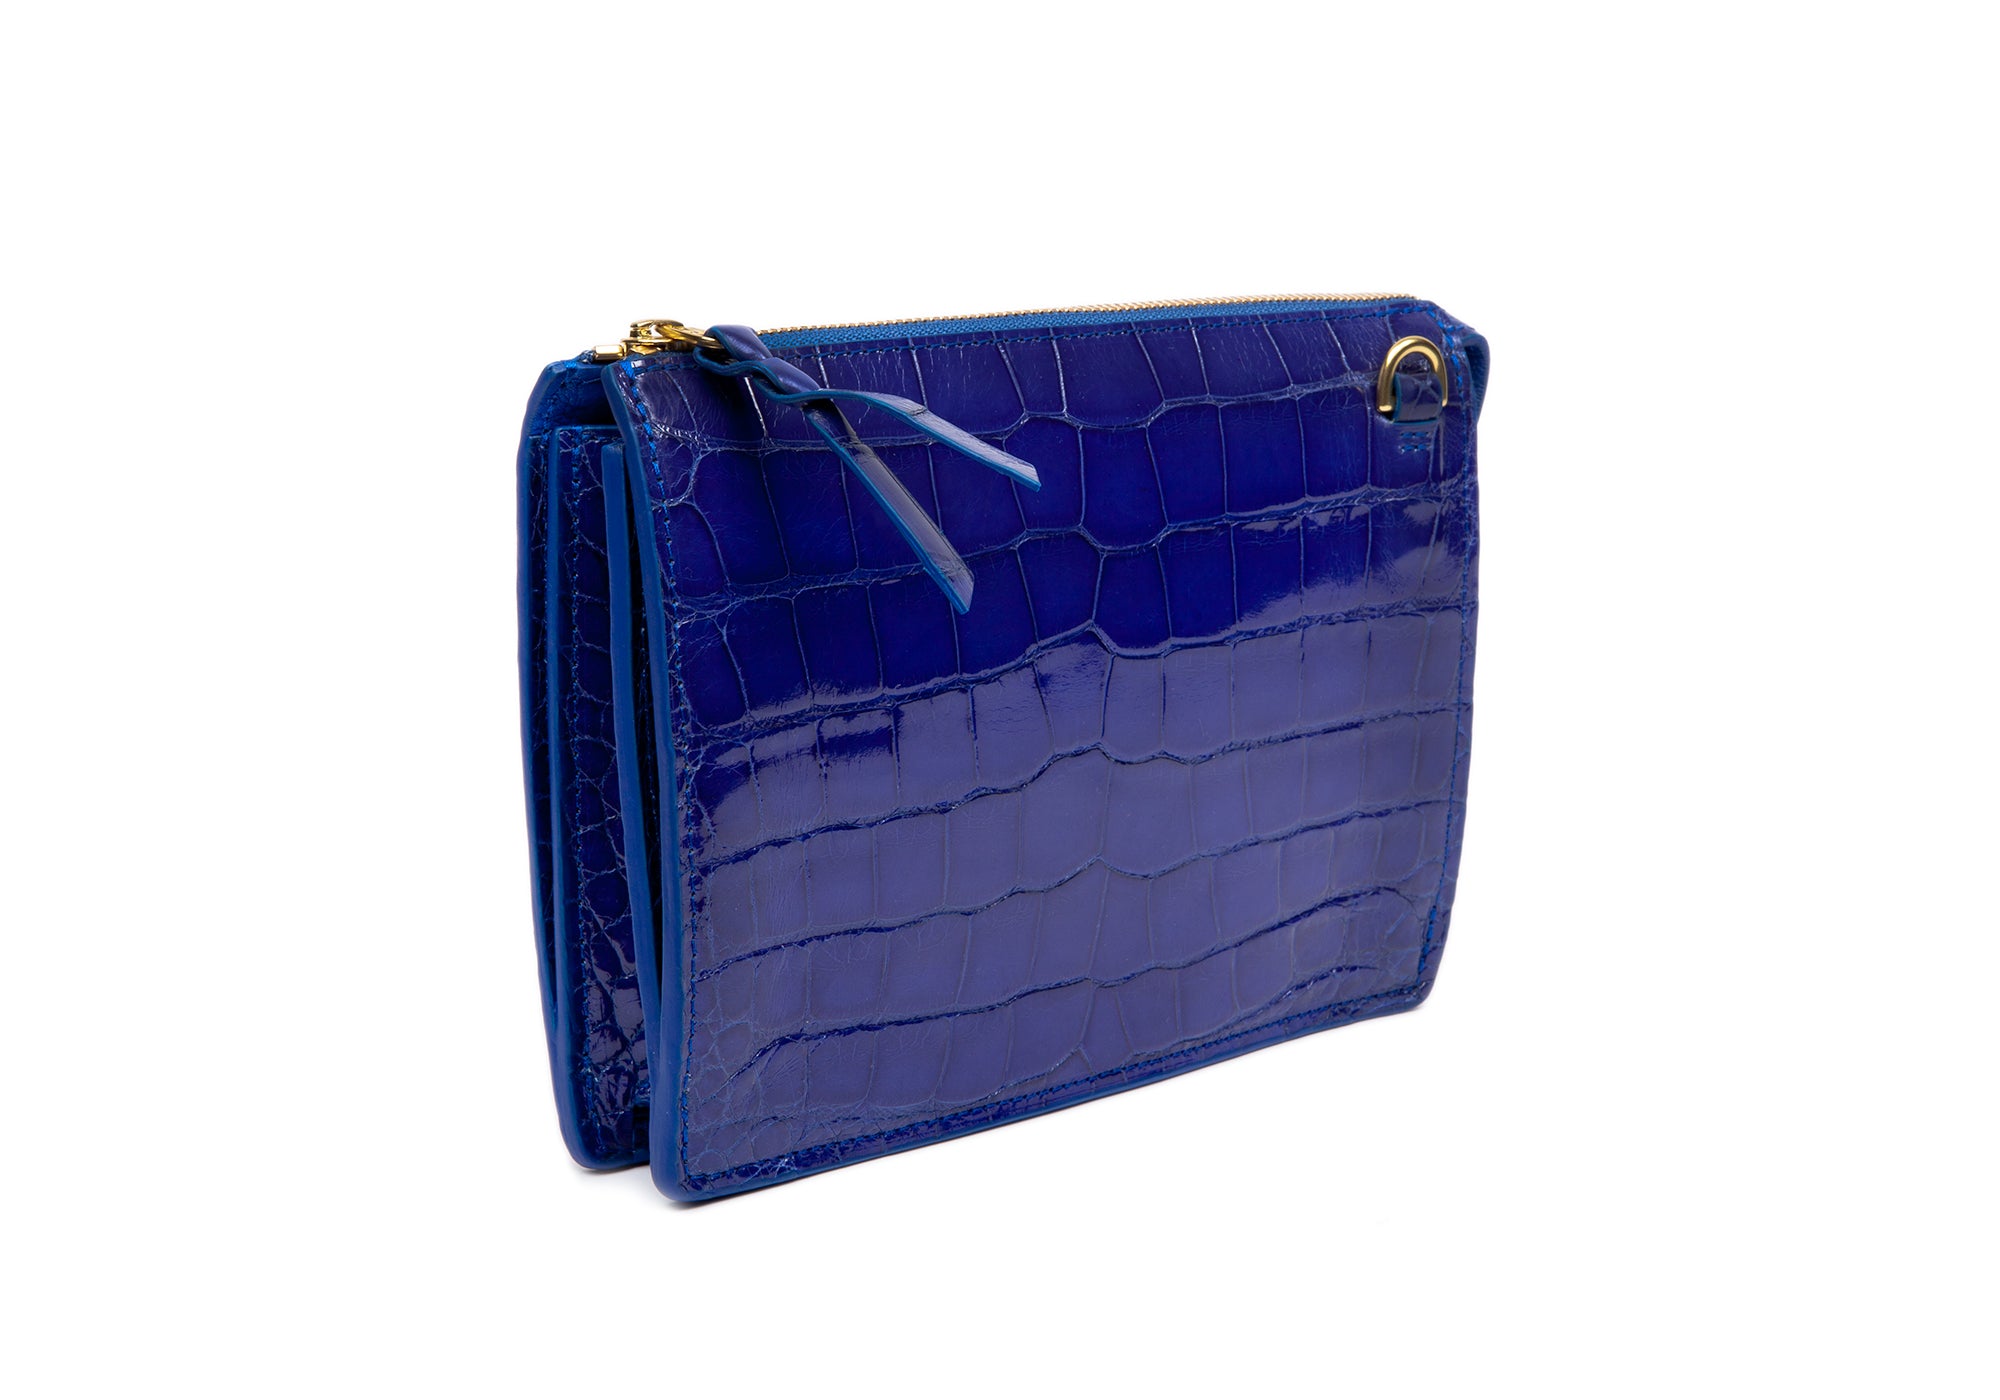 Electric blue leather-effect Nano bag | The Kooples